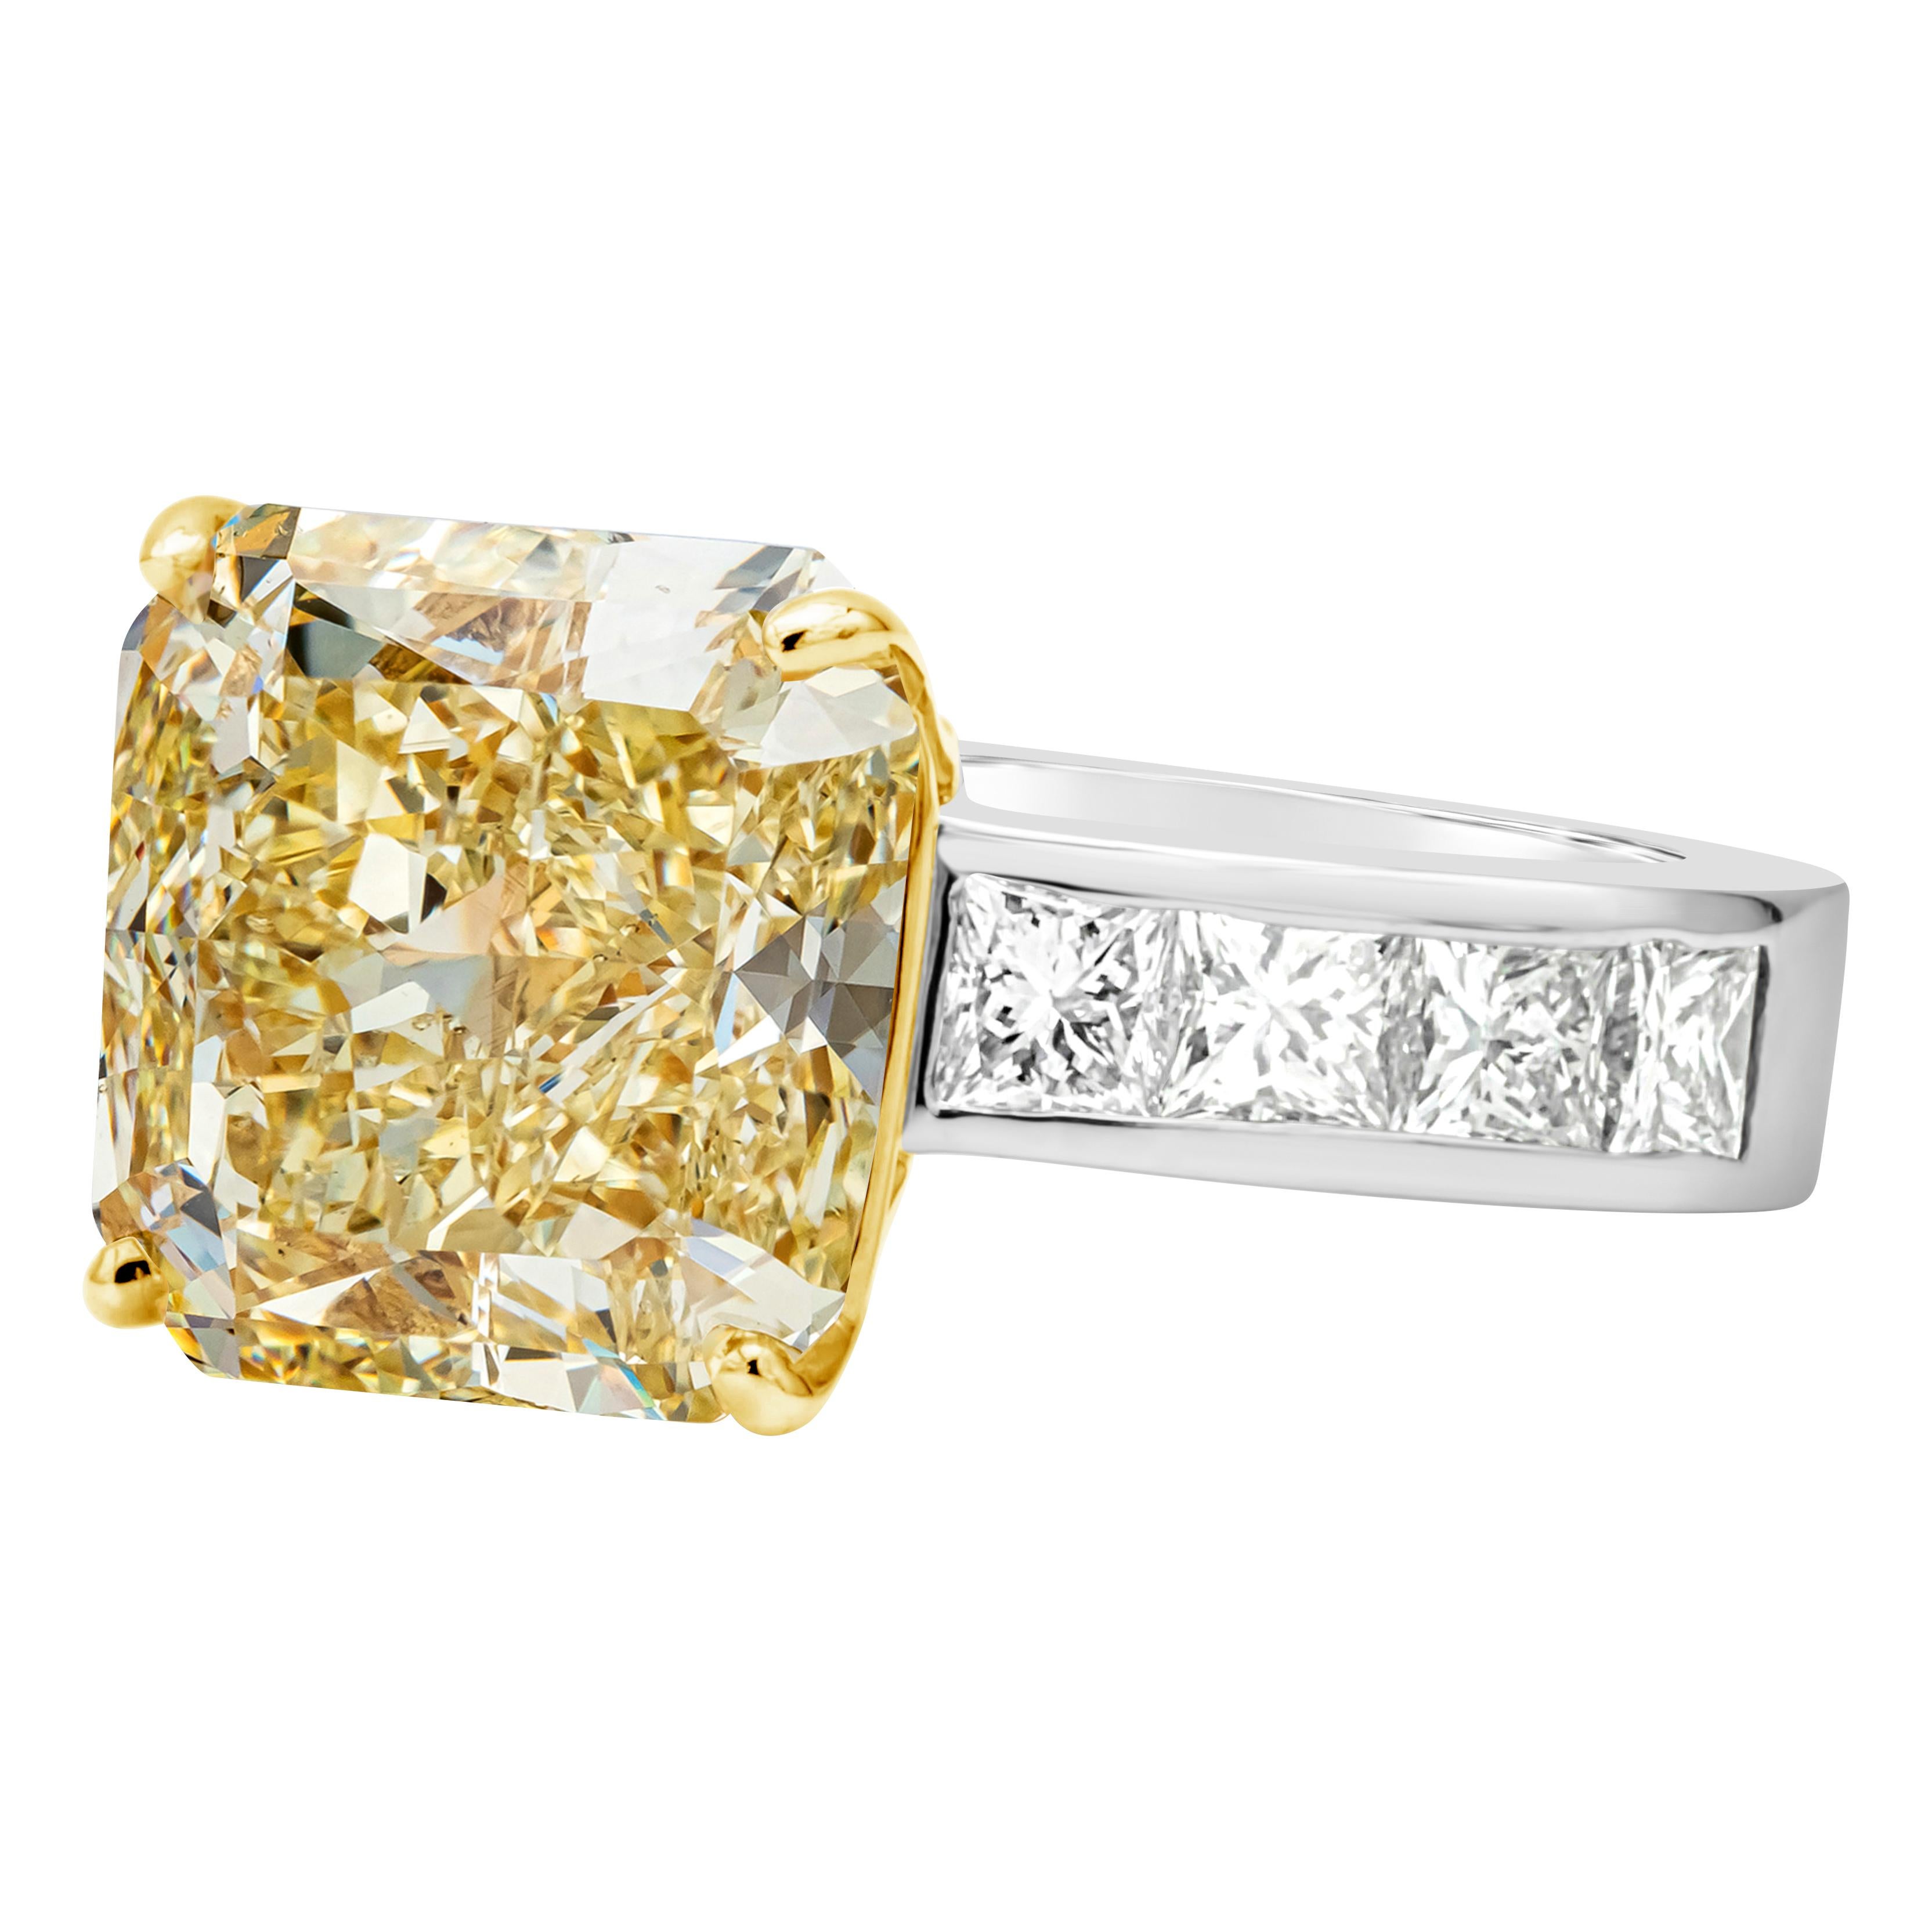 Contemporary GIA Certified 9.36 Carats Radiant Cut Fancy Yellow Diamond Ring For Sale